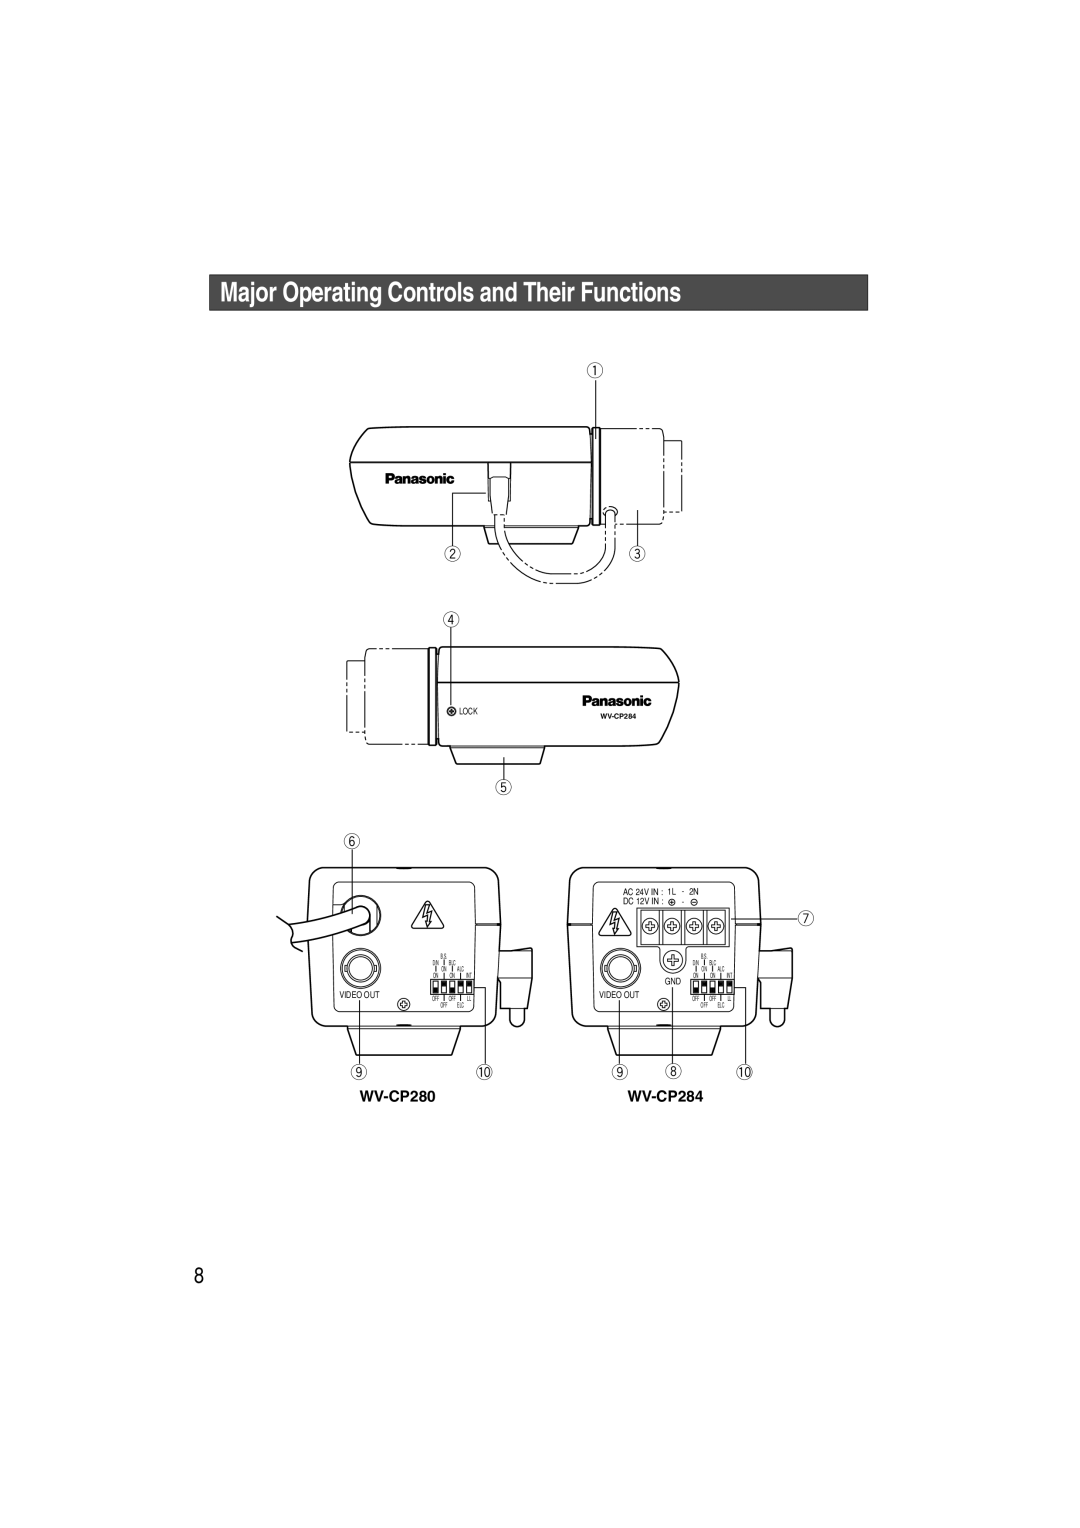 Panasonic WV-CP284 operating instructions Major Operating Controls and Their Functions, q w e r, WV-CP280, AC 24V IN 1L 